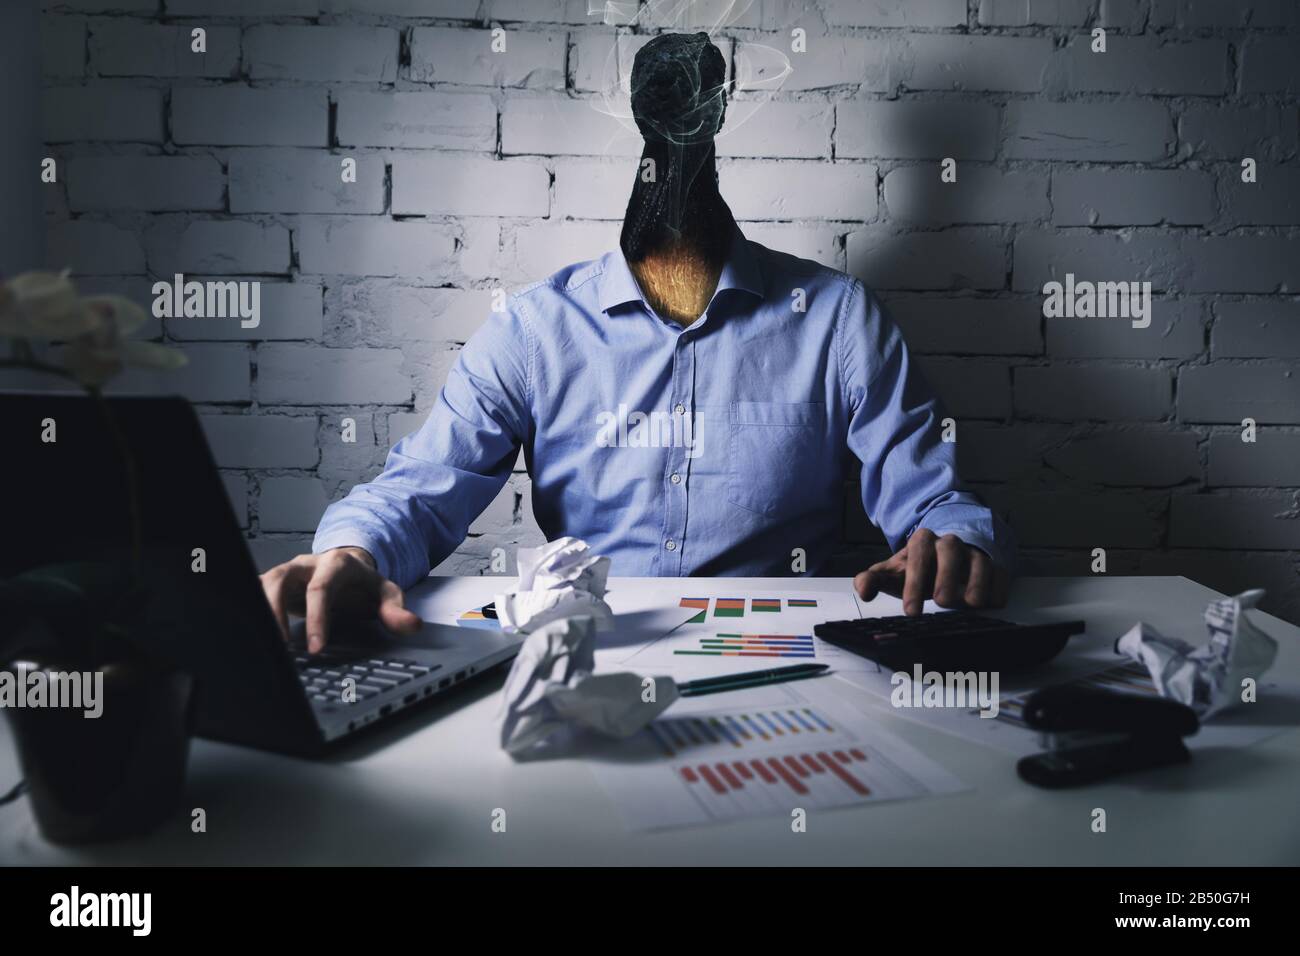 burnout syndrome at work concept. exhausted overworked man working in office Stock Photo